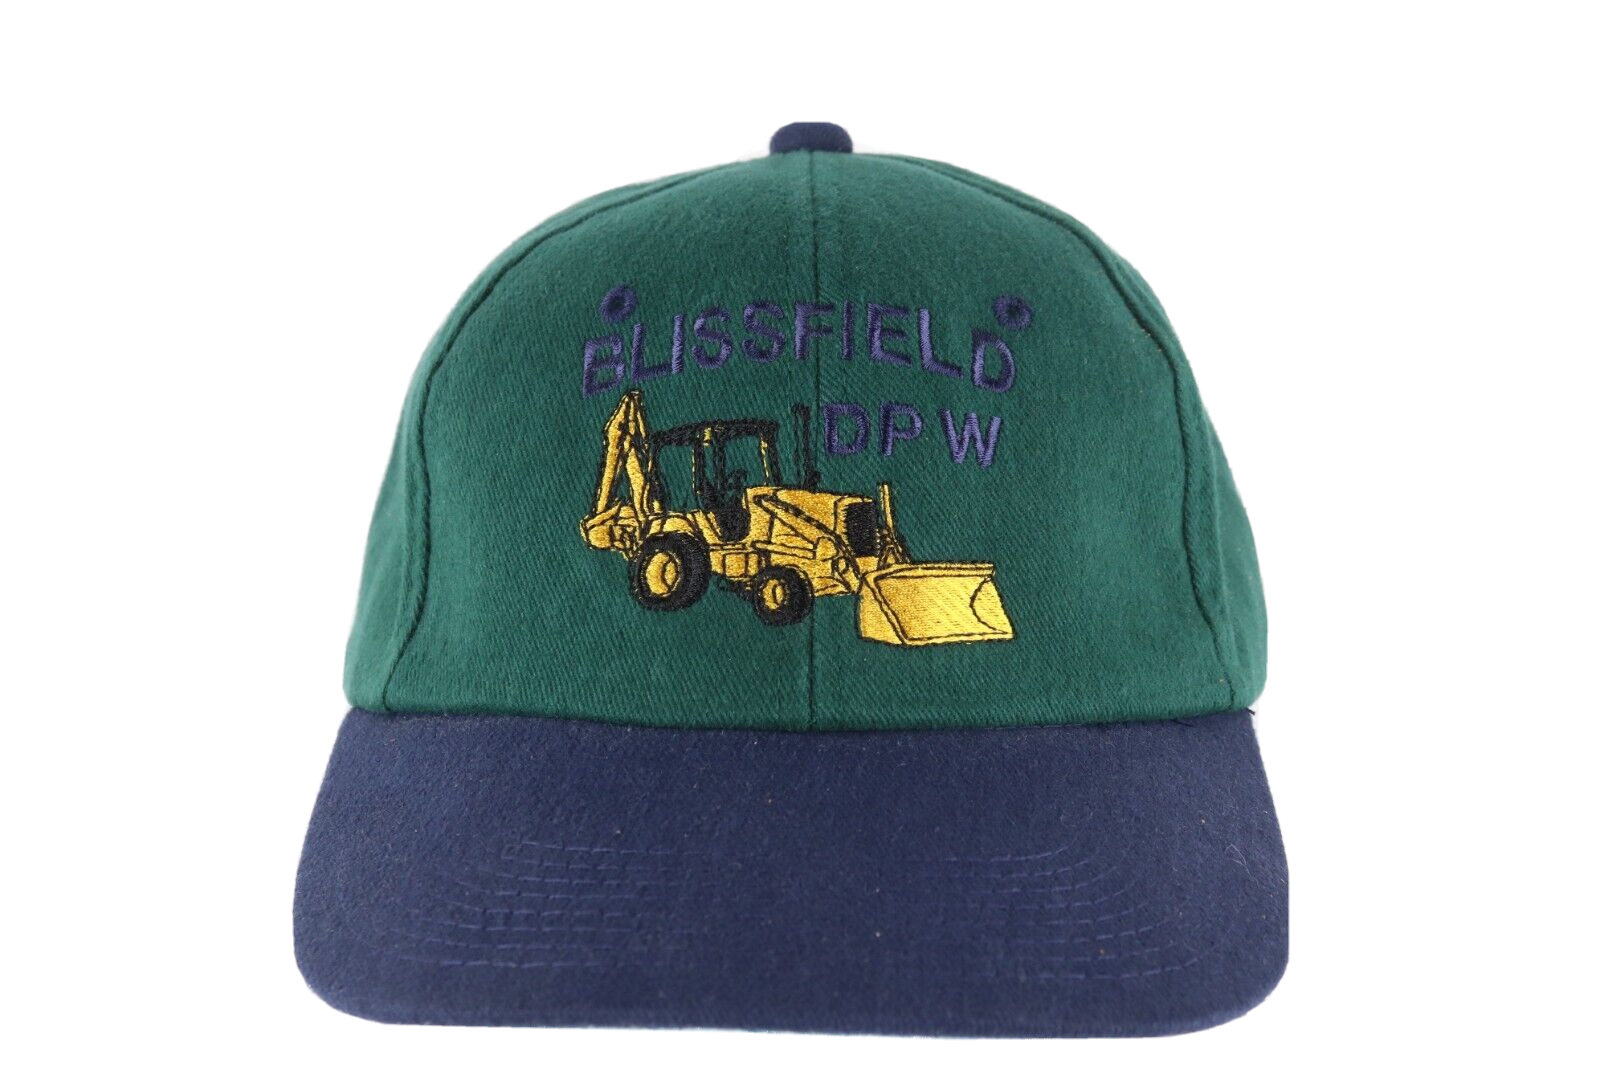 Primary image for Vintage 90s Blissfield DPW Department of Public Works Bulldozer Snapback Hat